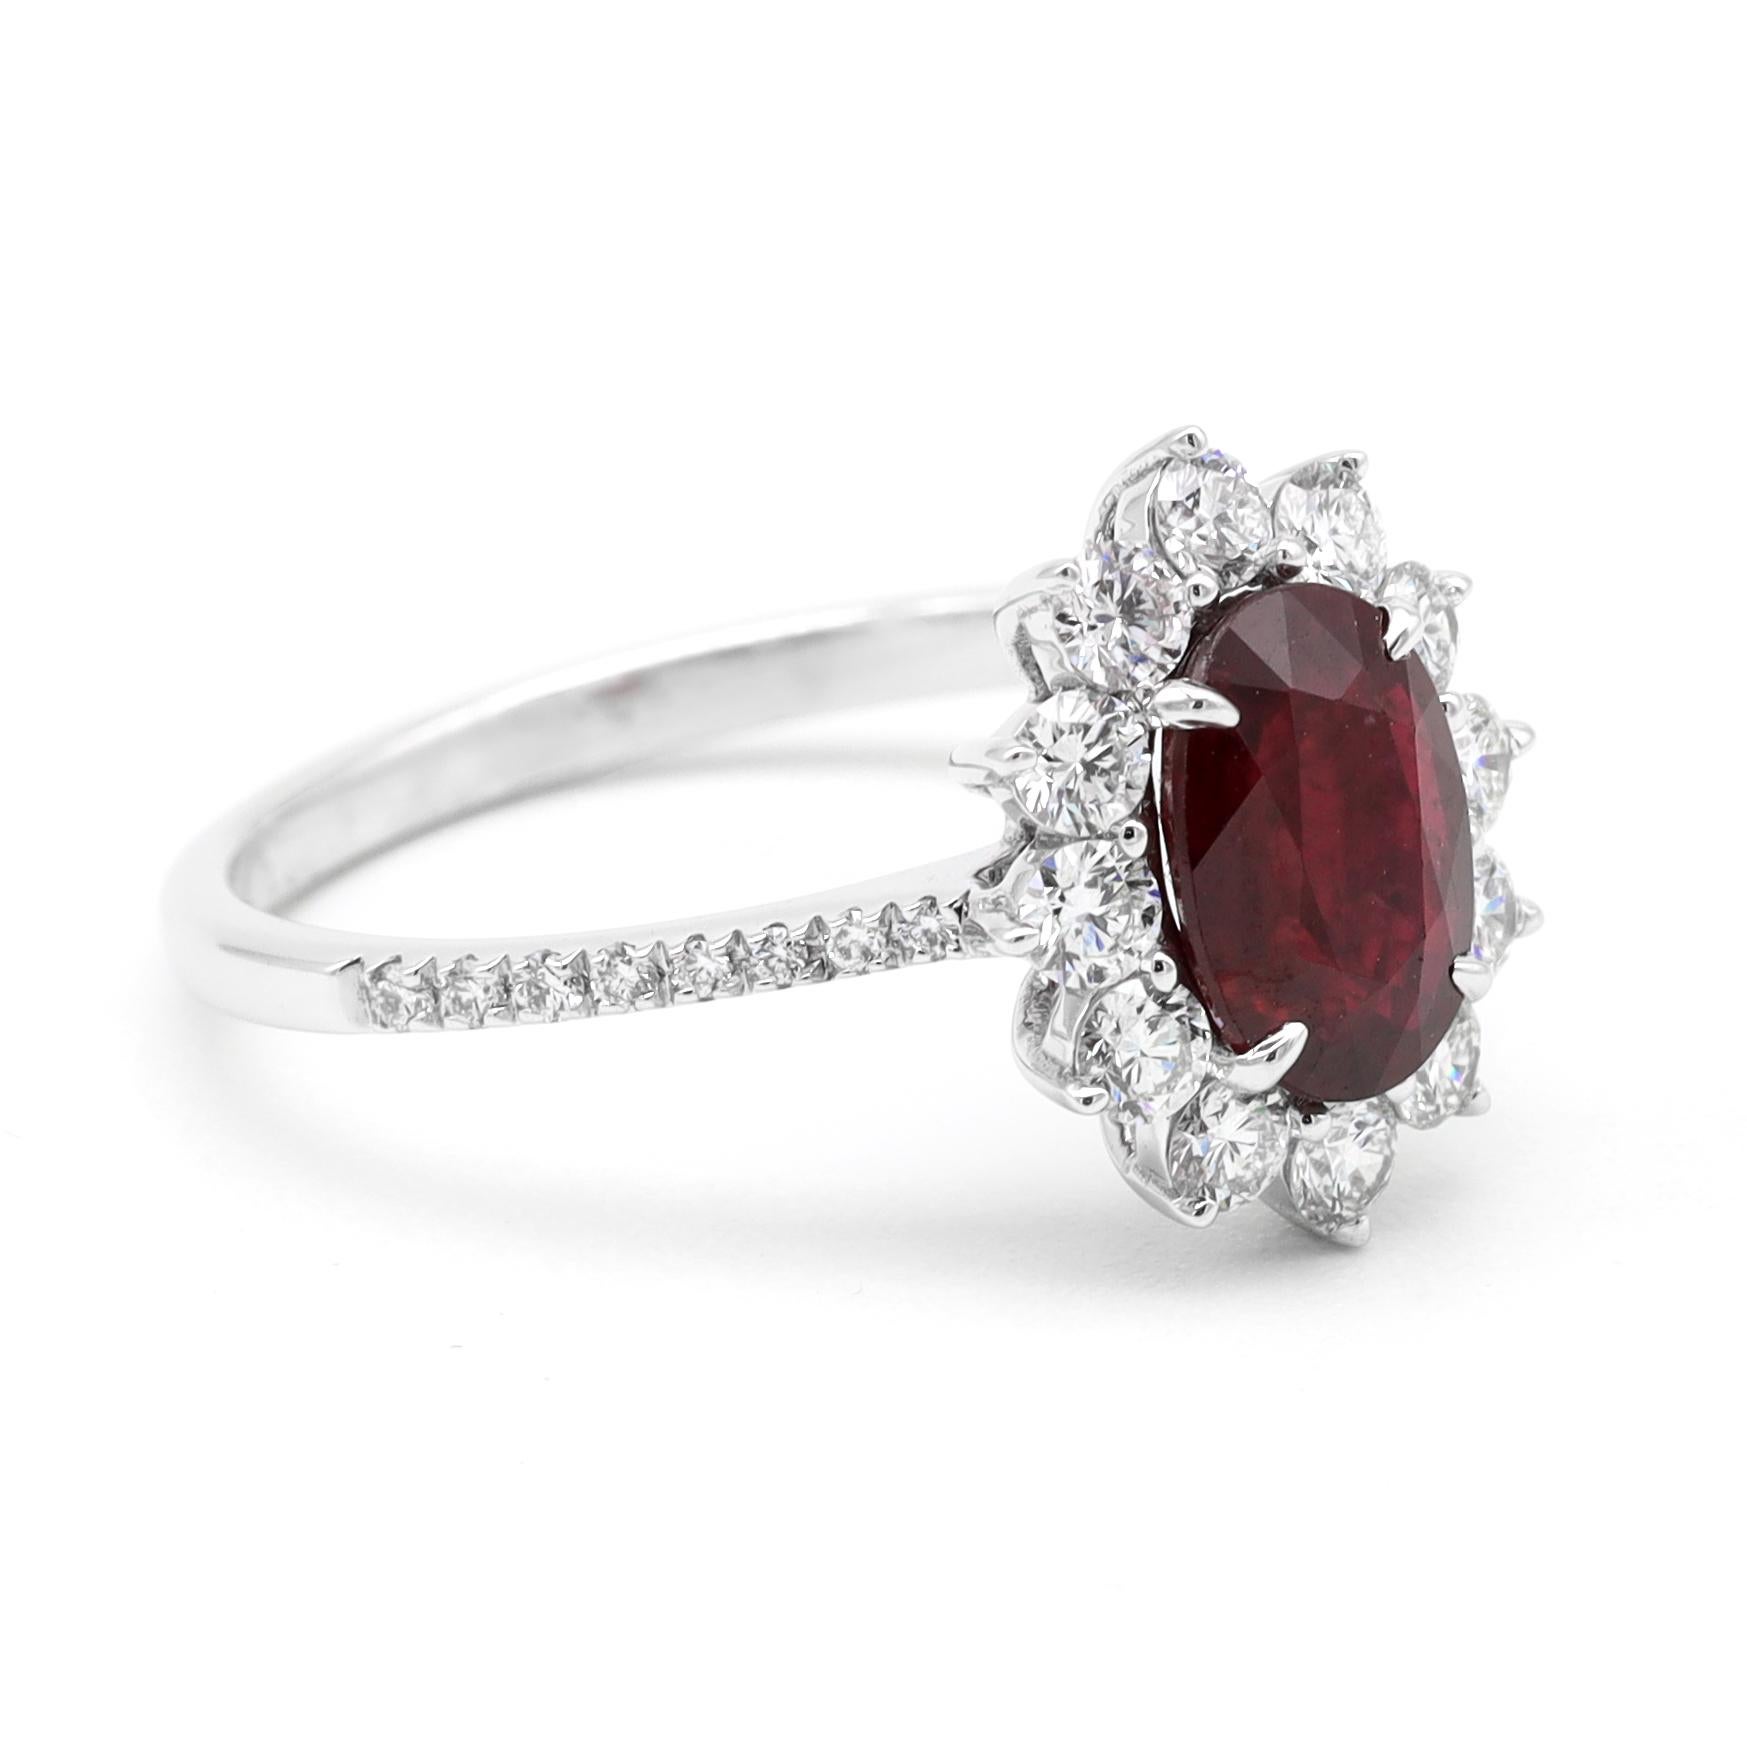 18 Karat White Gold 1.35 Carat Deep Red Ruby Oval-Cut and Diamond Cluster Ring

This classic scarlet red ruby and diamond halo ring is regal. The fantastic vivid ruby oval eagle-prong set is surrounded by the outward-facing open 3-prong set